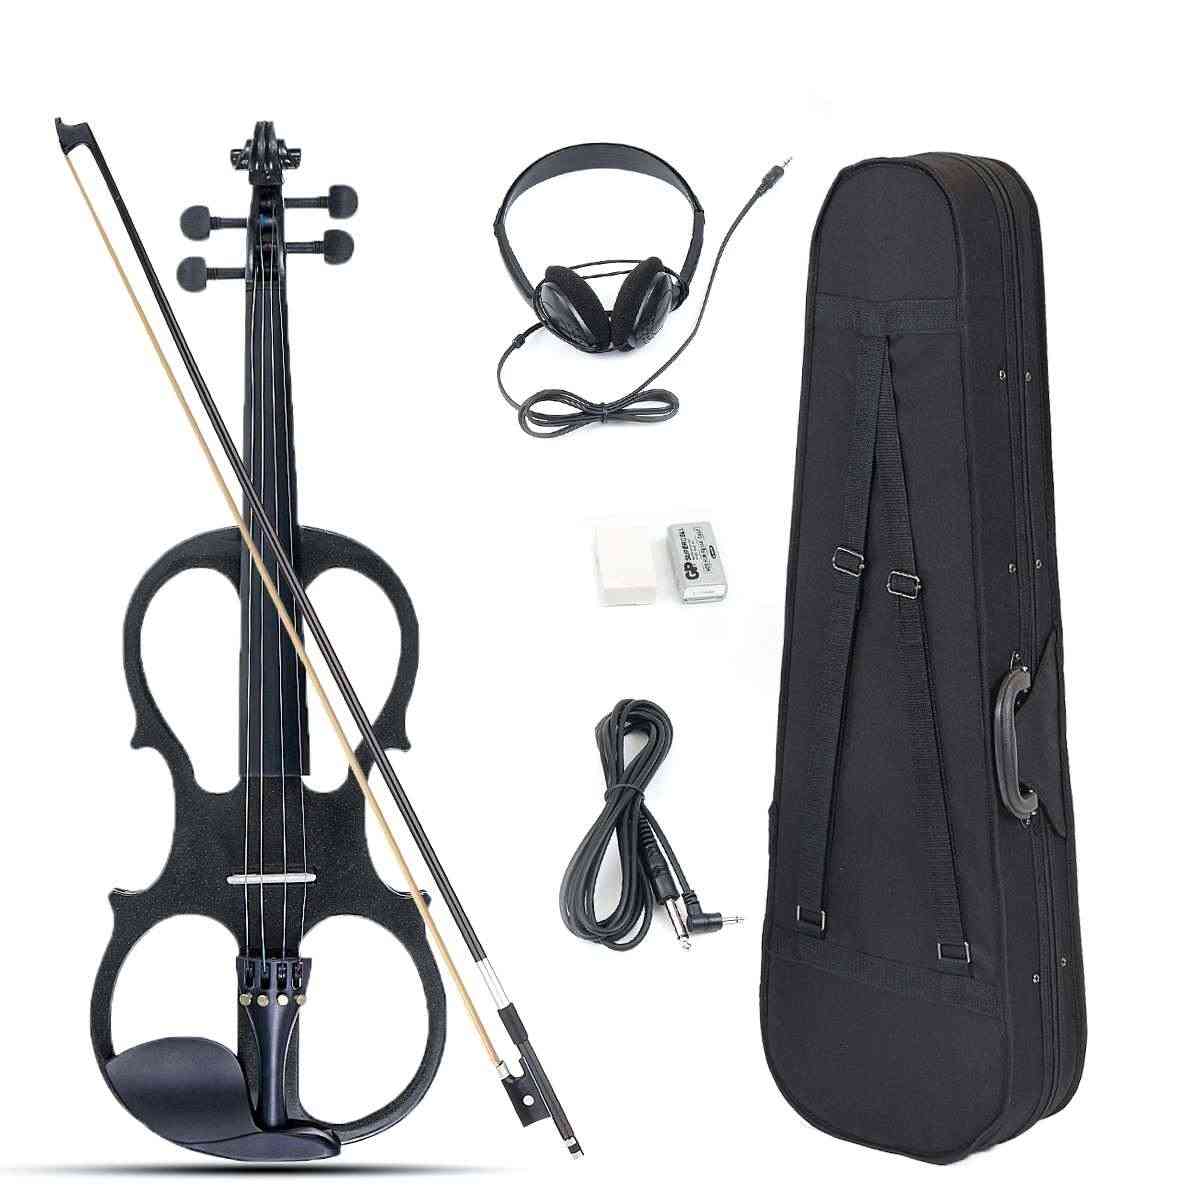 Portable Bilateral Electric Violin - Basswood Fiddle Stringed Instrument